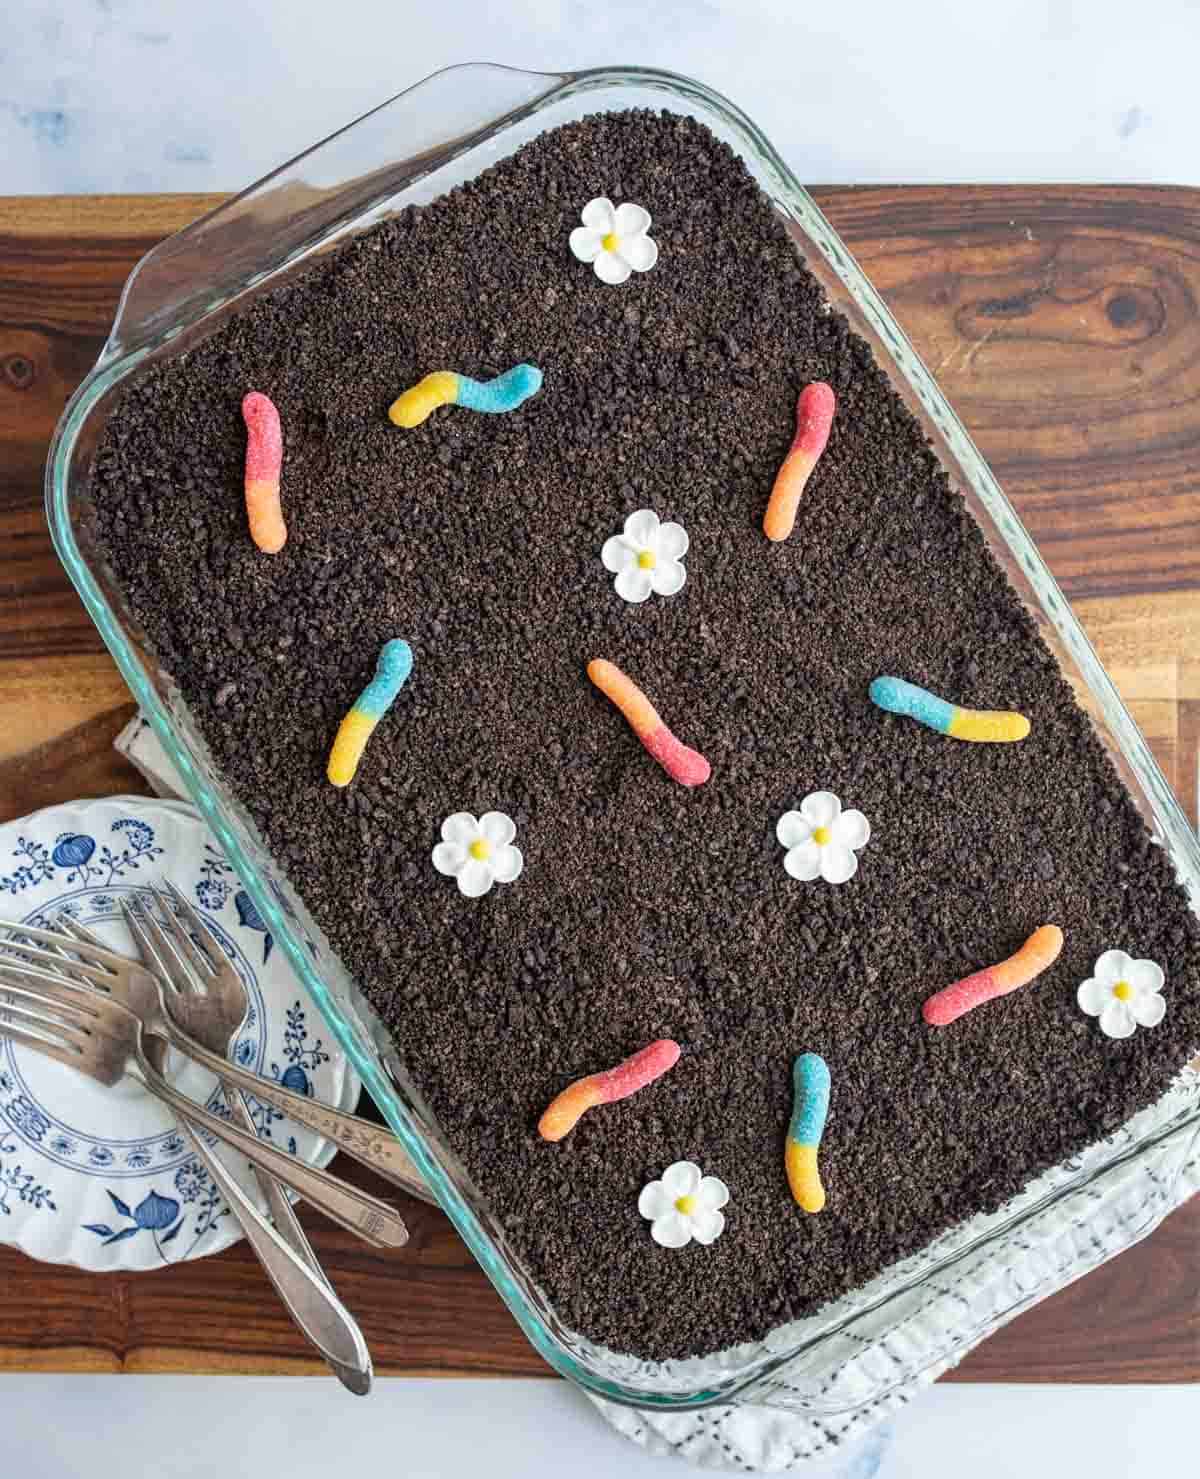 Full baking dish of dirt pudding complete with gummy worms.